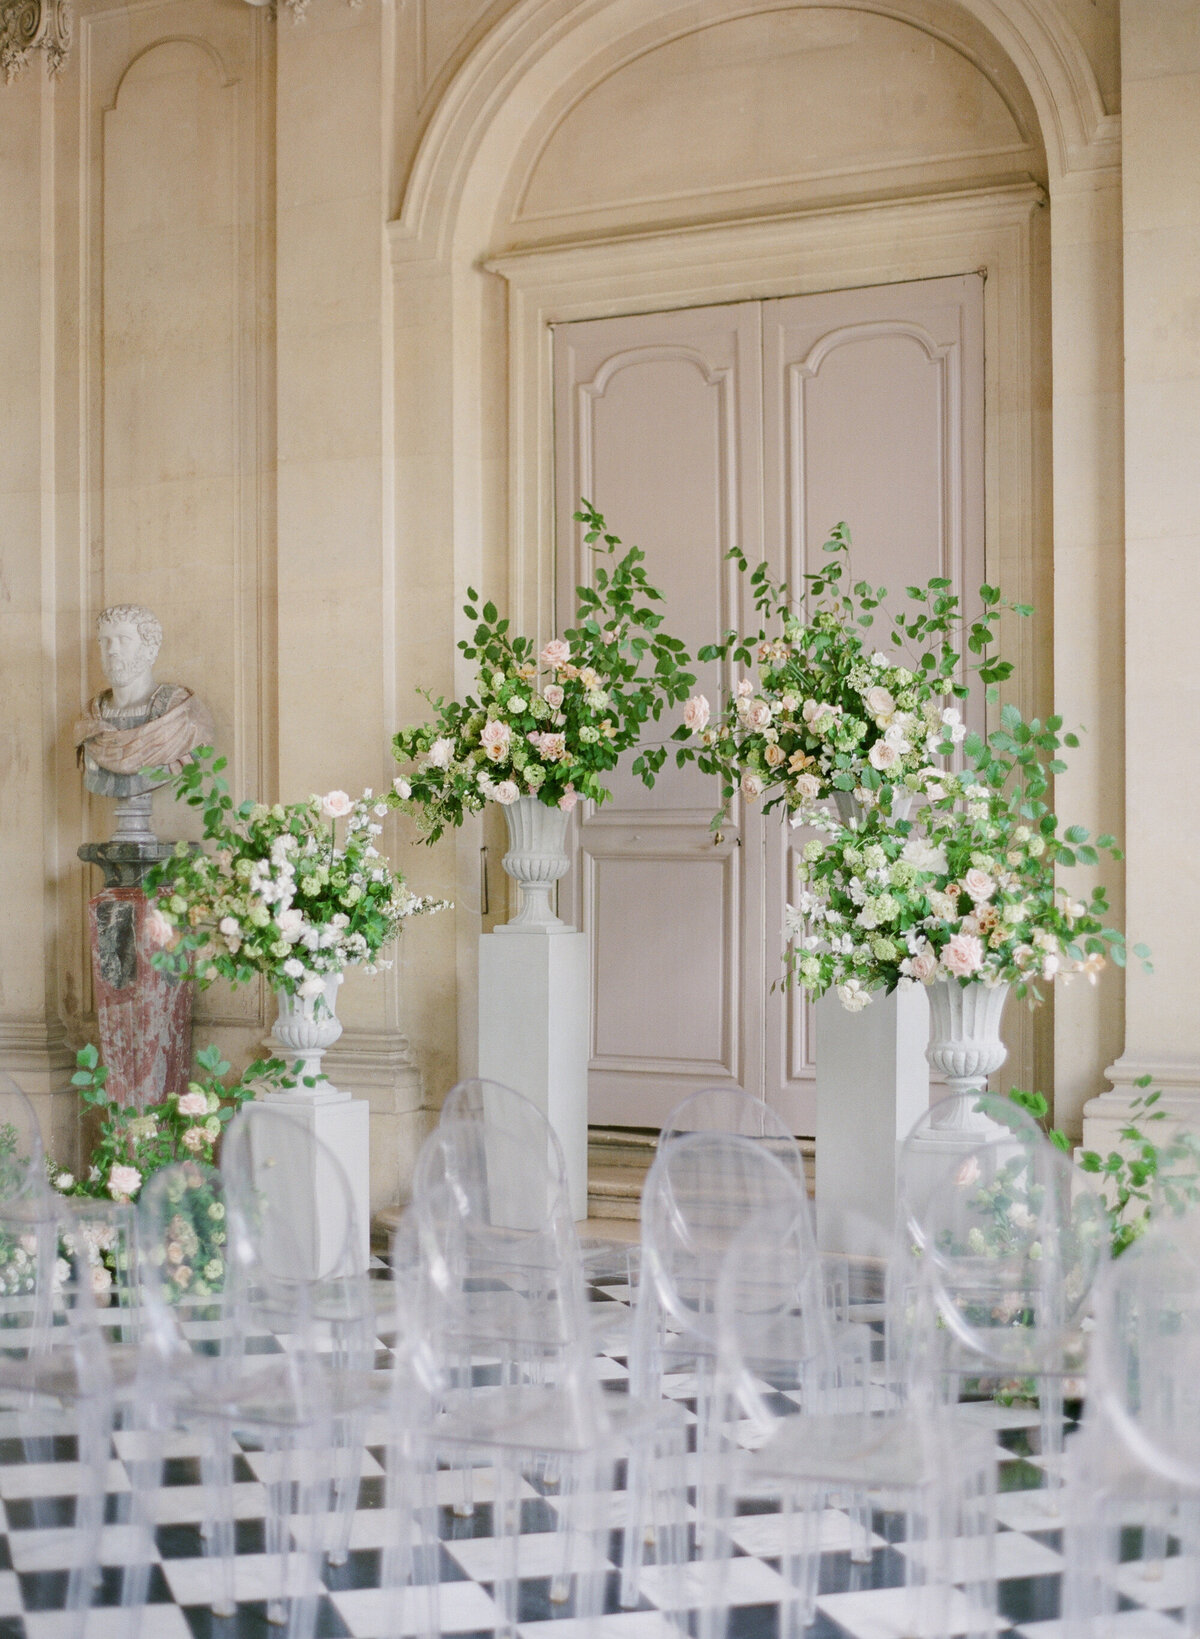 Jennifer Fox Weddings English speaking wedding planning & design agency in France crafting refined and bespoke weddings and celebrations Provence, Paris and destination Laurel-Chris-Chateau-de-Champlatreaux-Molly-Carr-Photography-60